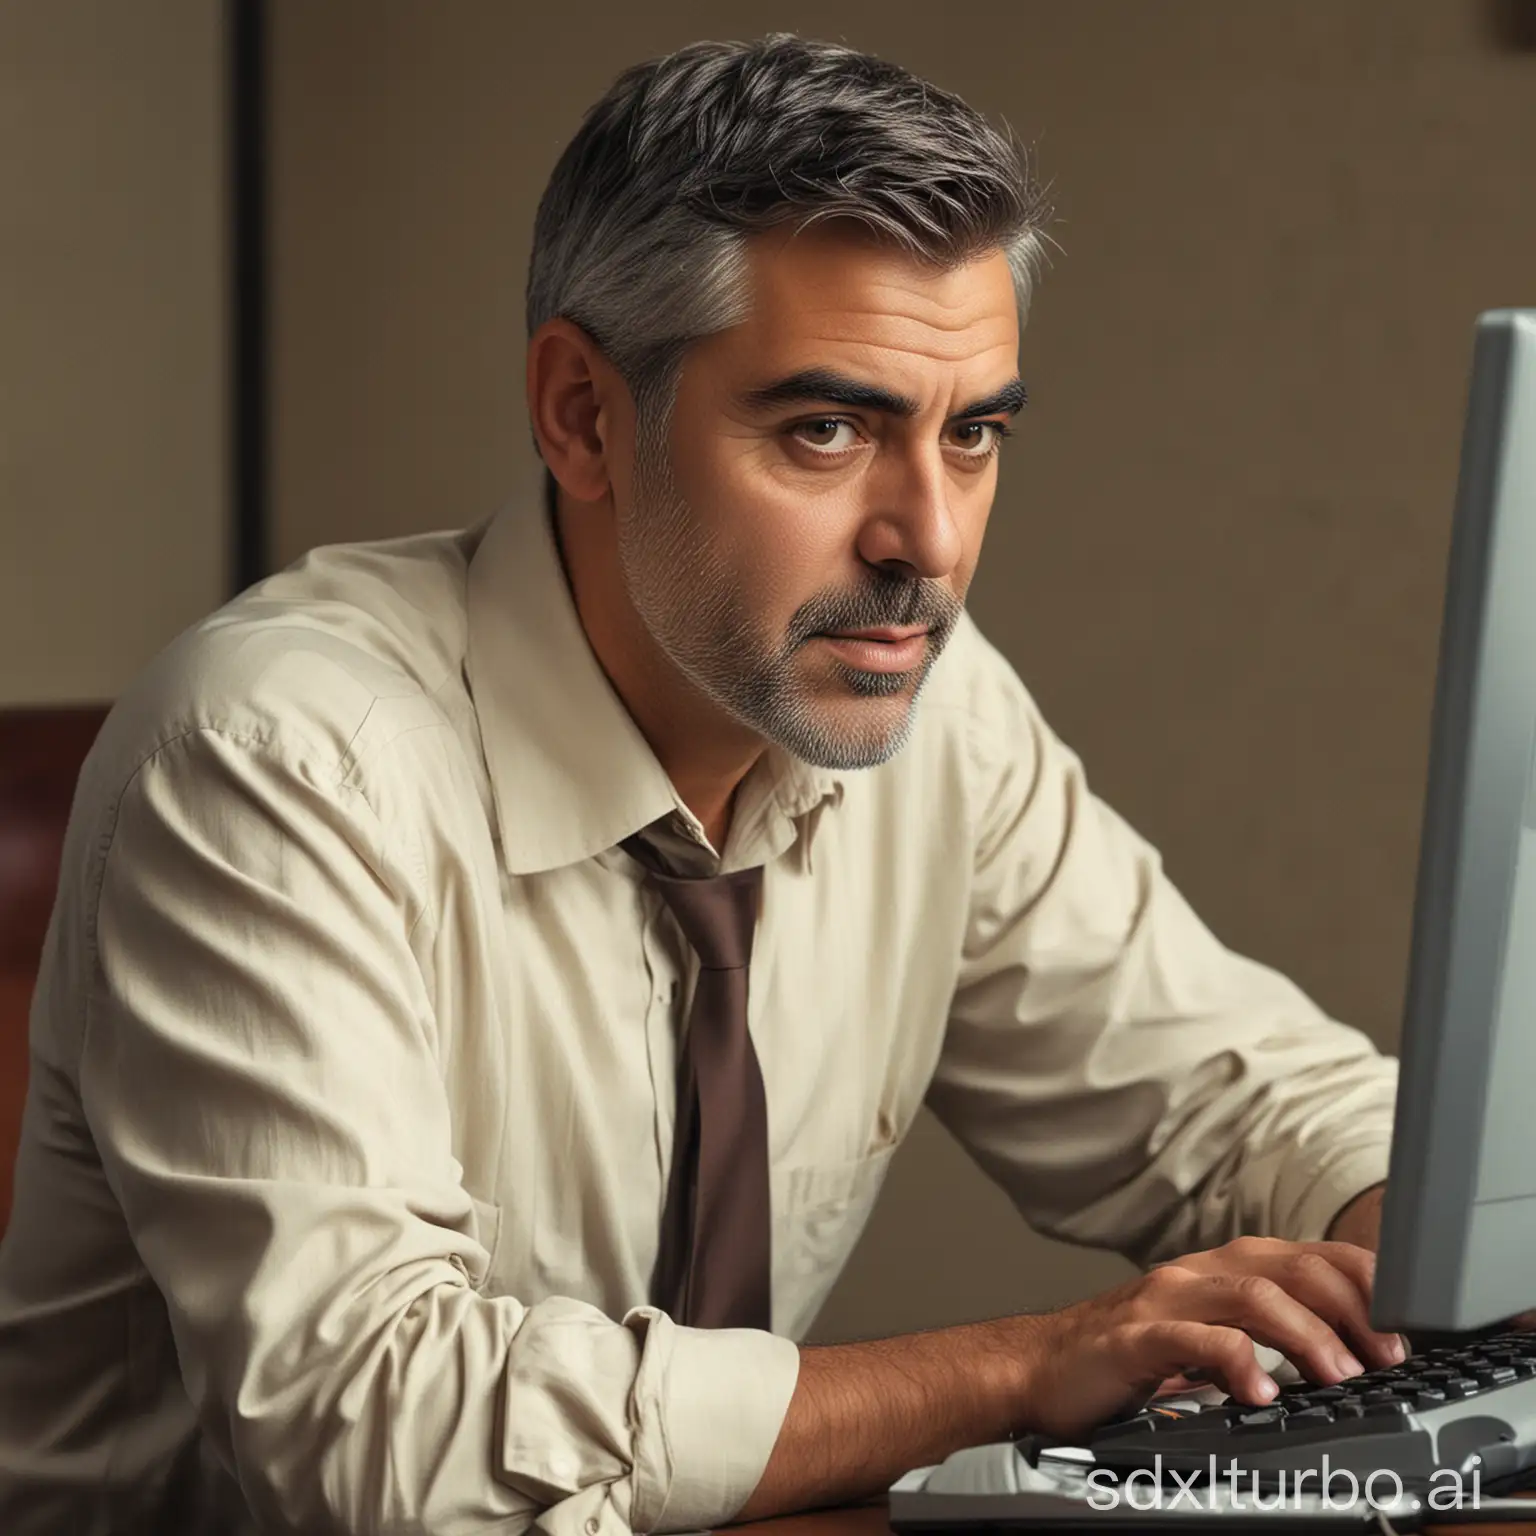 a man who looks like george clooney typing furiously on a computer